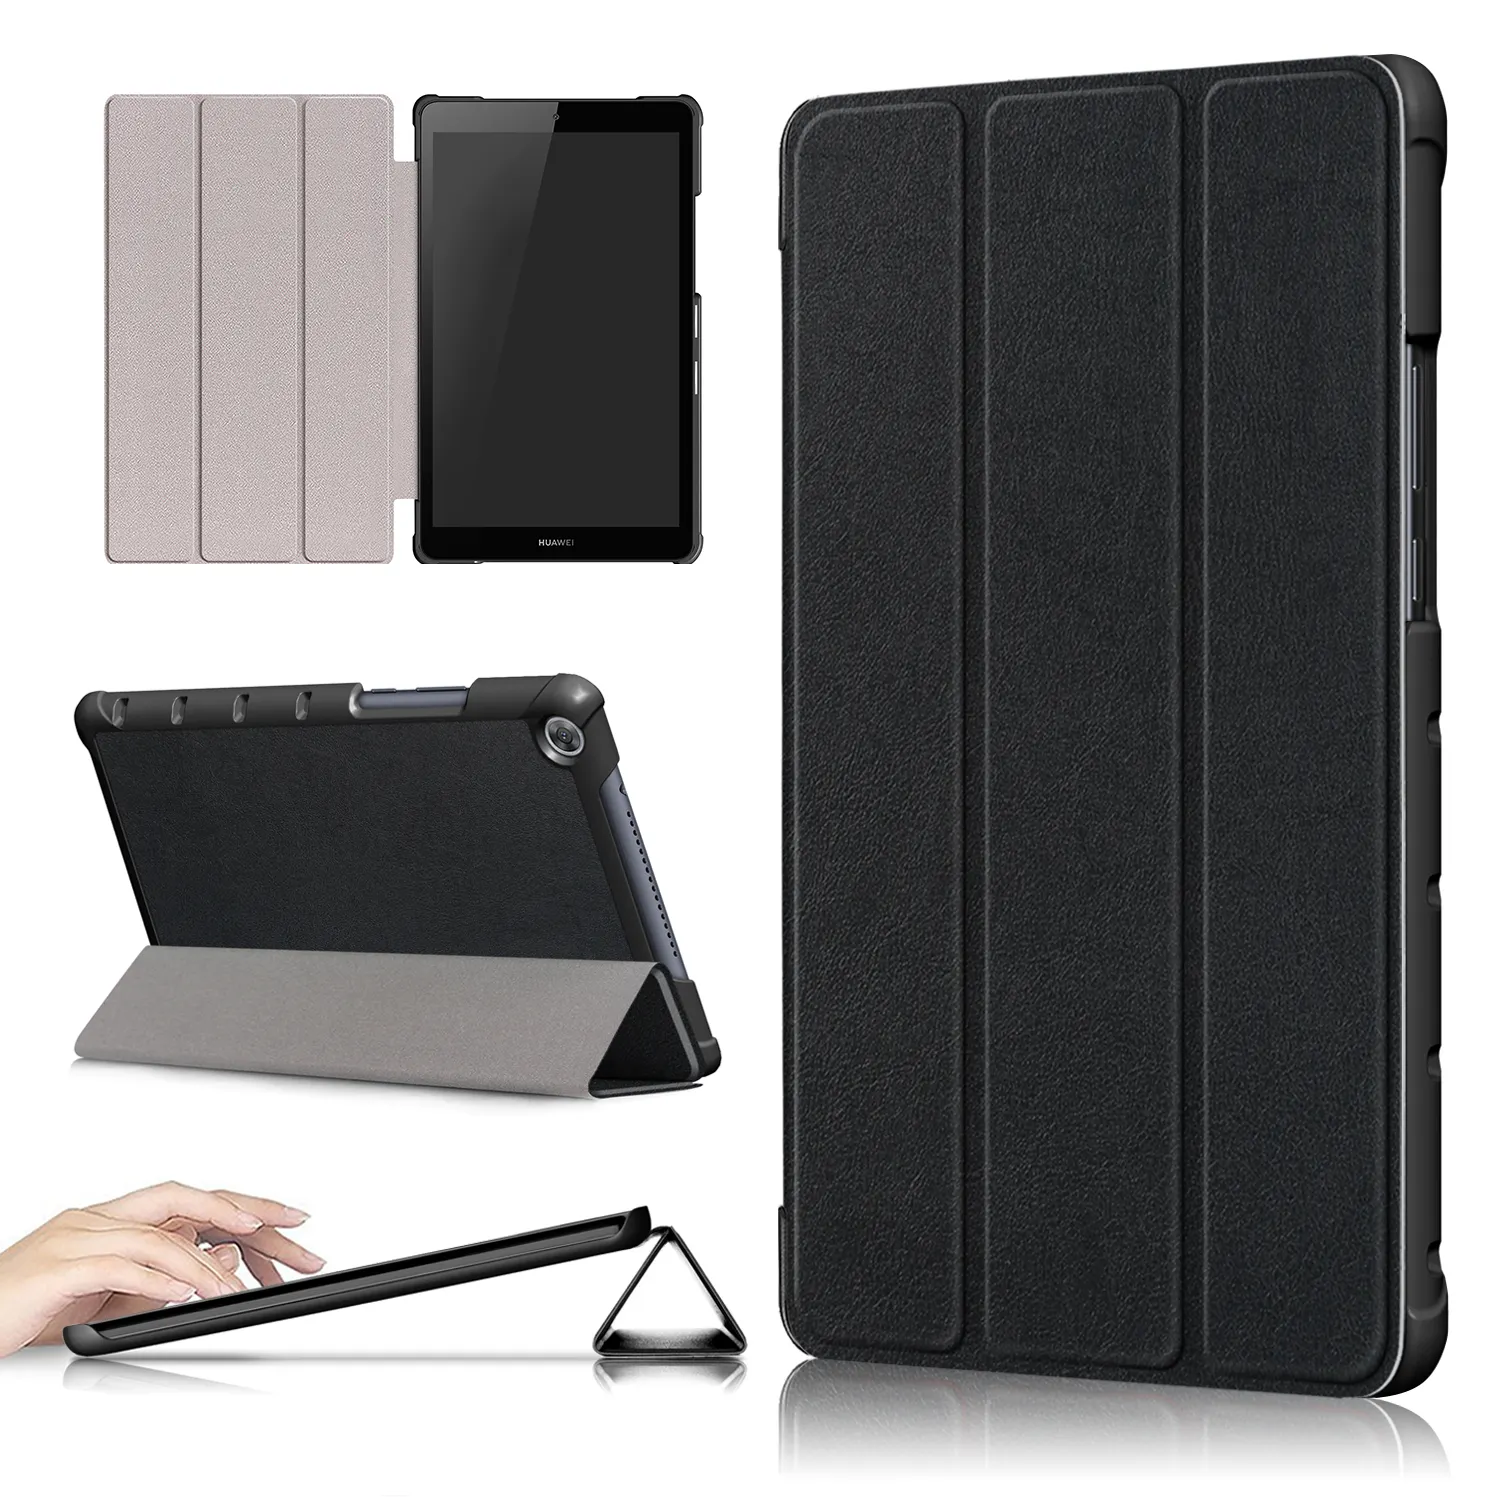 tri-fold pu leather case for Huawei mediapad M5 lite 8.0 tablet,for M5 8 Inch JDN2-AL00 JDN2-W09 cover